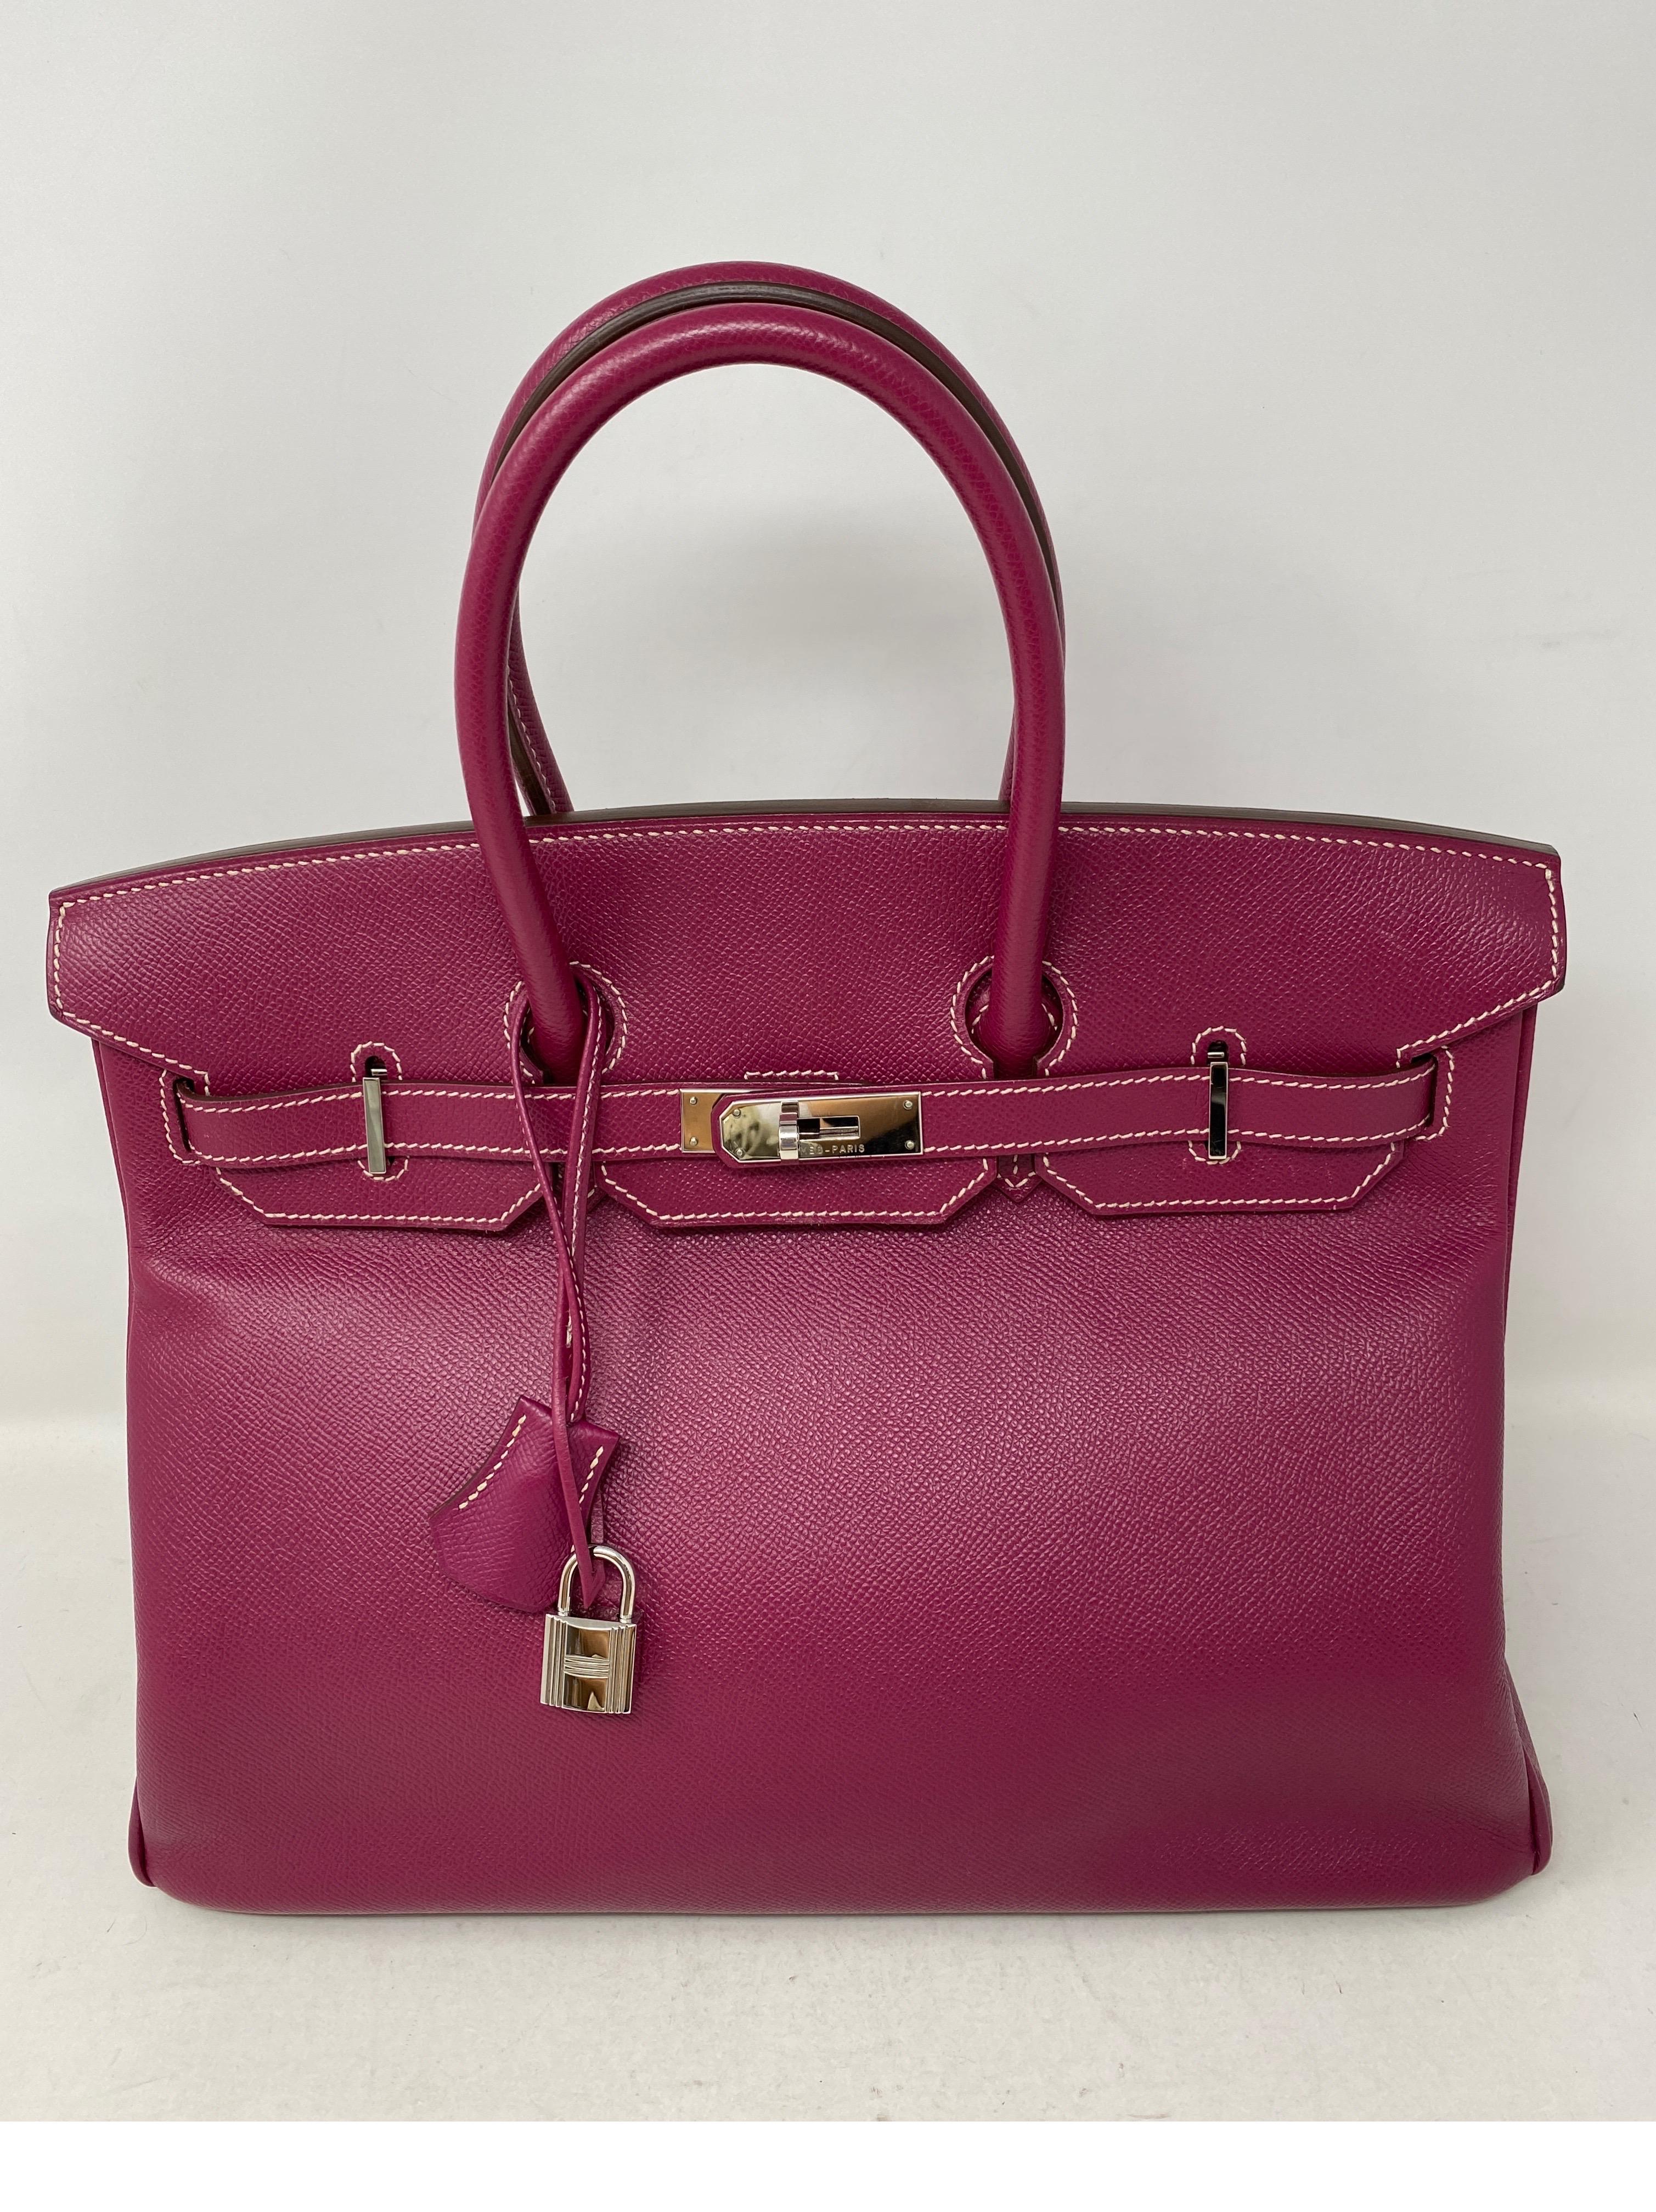 Hermes Birkin Tosca and Rose Tyrien interior Candy Bag. Birkin 35 size. Palladium hardware. Plastic still on hardware. Excellent condition. Beautiful purple pink color with hot pink interior. Investment bag. O stamp. Includes clochette, lock, keys,